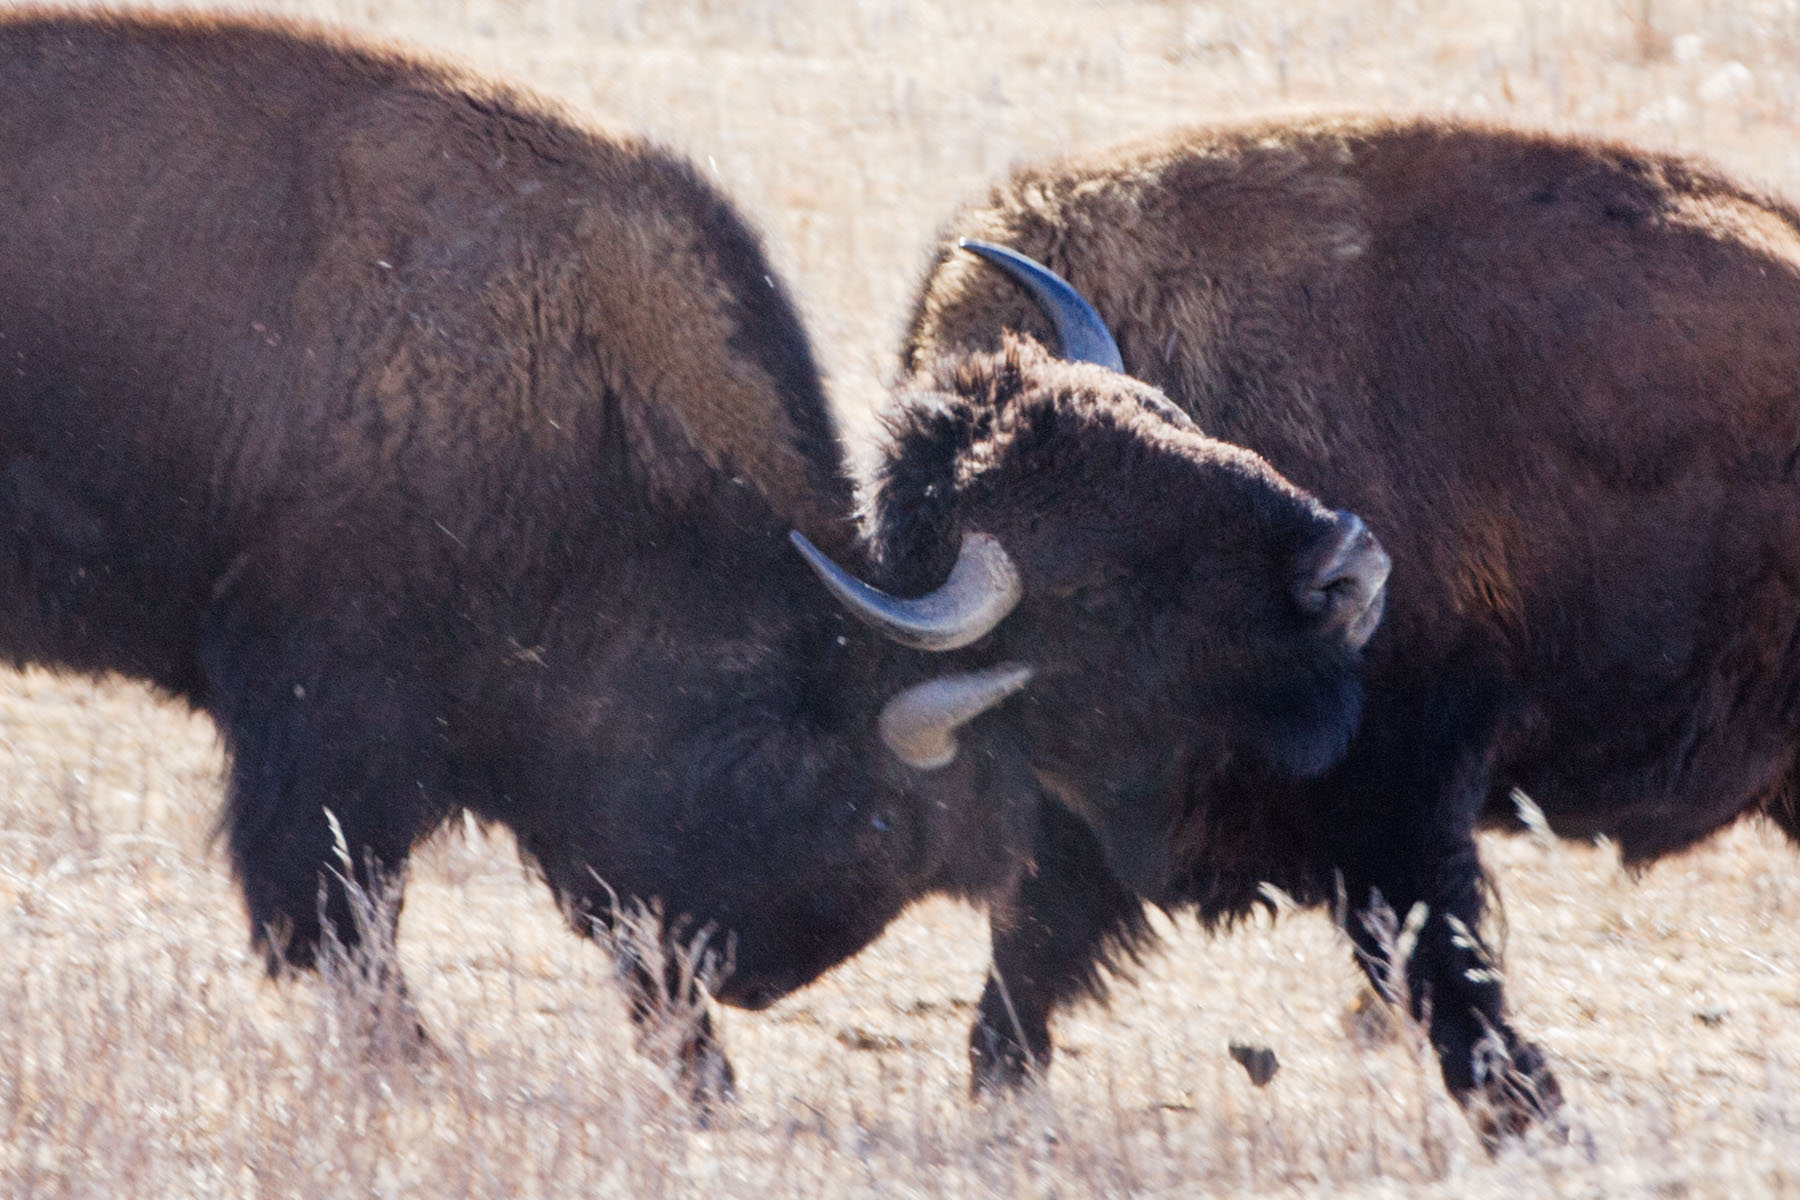 Bison jousting, Custer State Park, South Dakota.  Click for next photo.